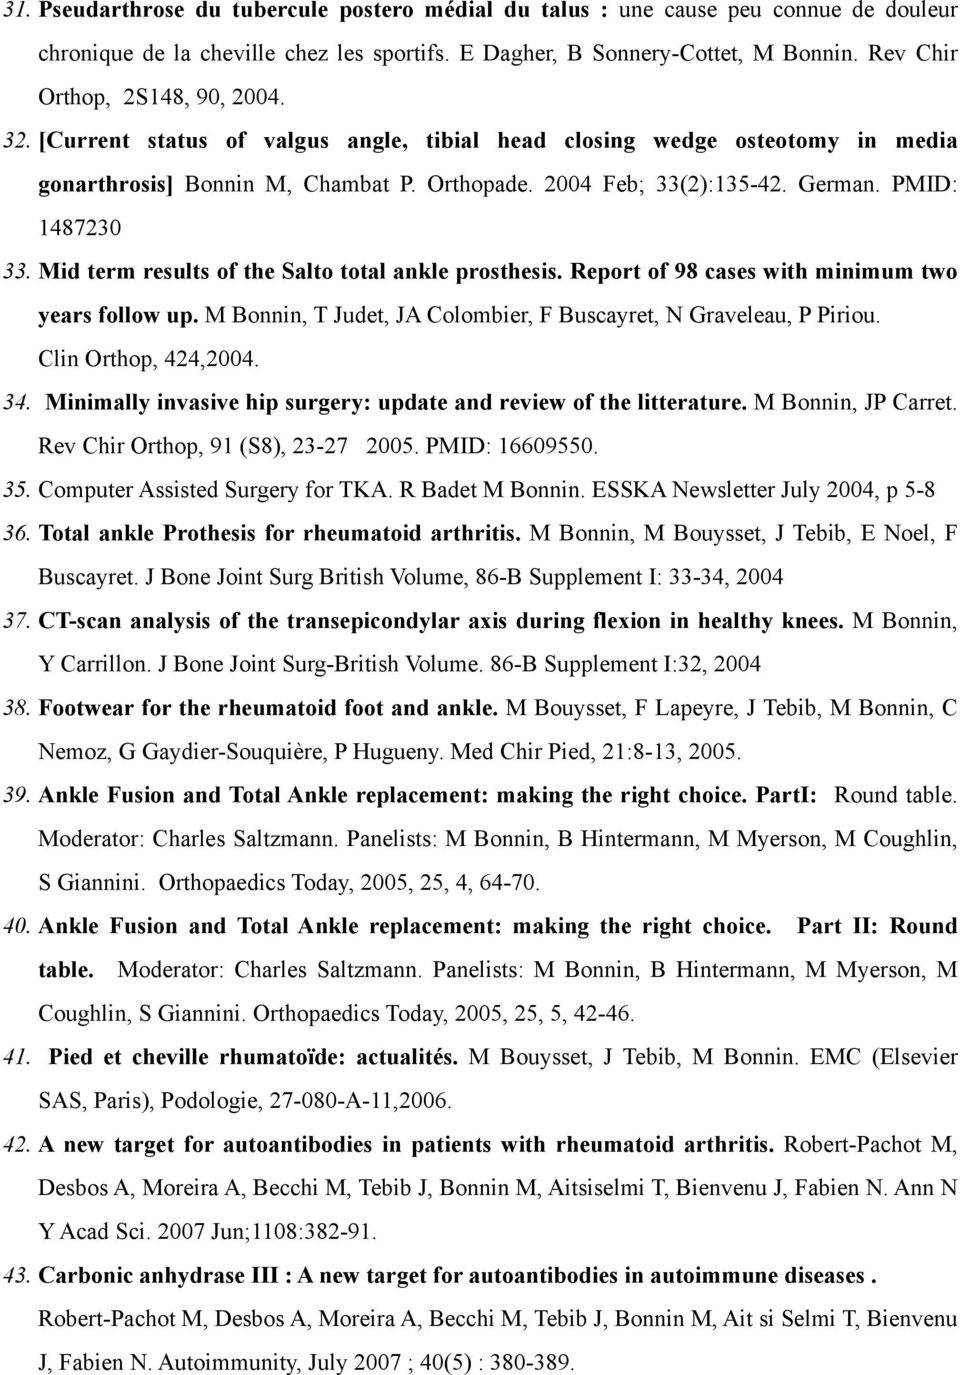 PMID: 1487230 33. Mid term results of the Salto total ankle prosthesis. Report of 98 cases with minimum two years follow up. M Bonnin, T Judet, JA Colombier, F Buscayret, N Graveleau, P Piriou.